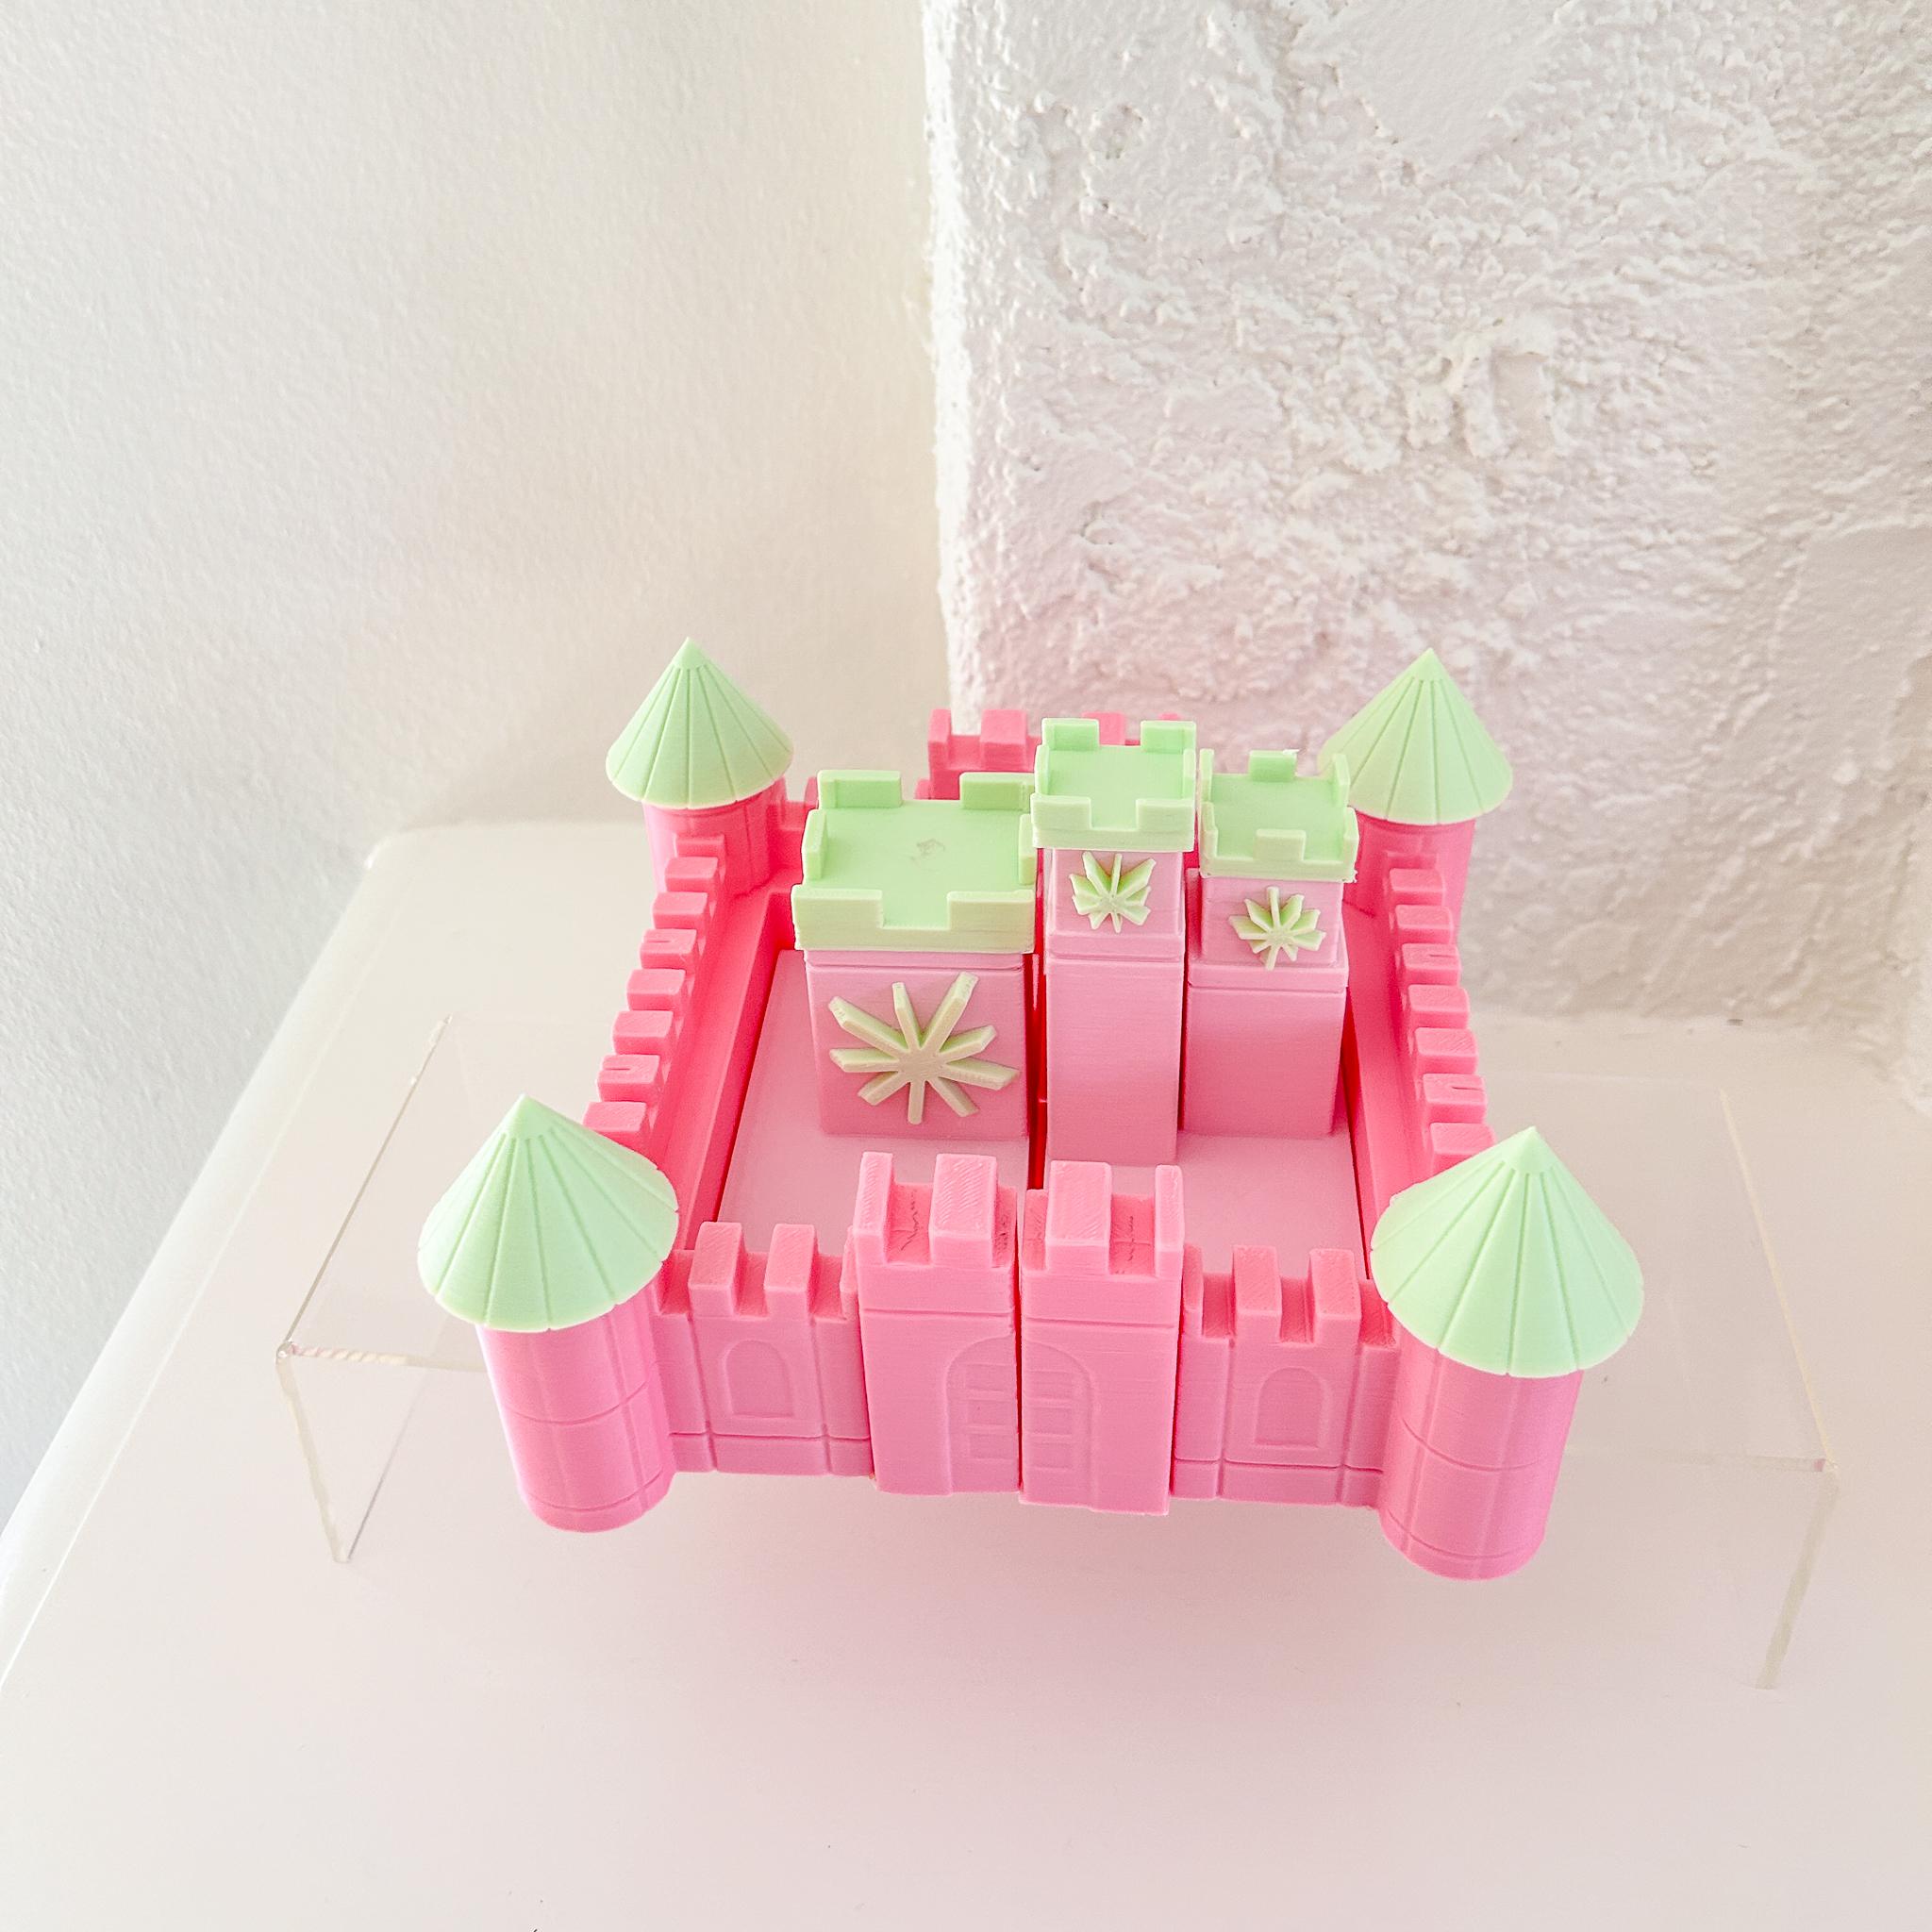 Midcentury Magical Castle Bookend - Vintage Inspired Home Decor and Functional Storage 3d model